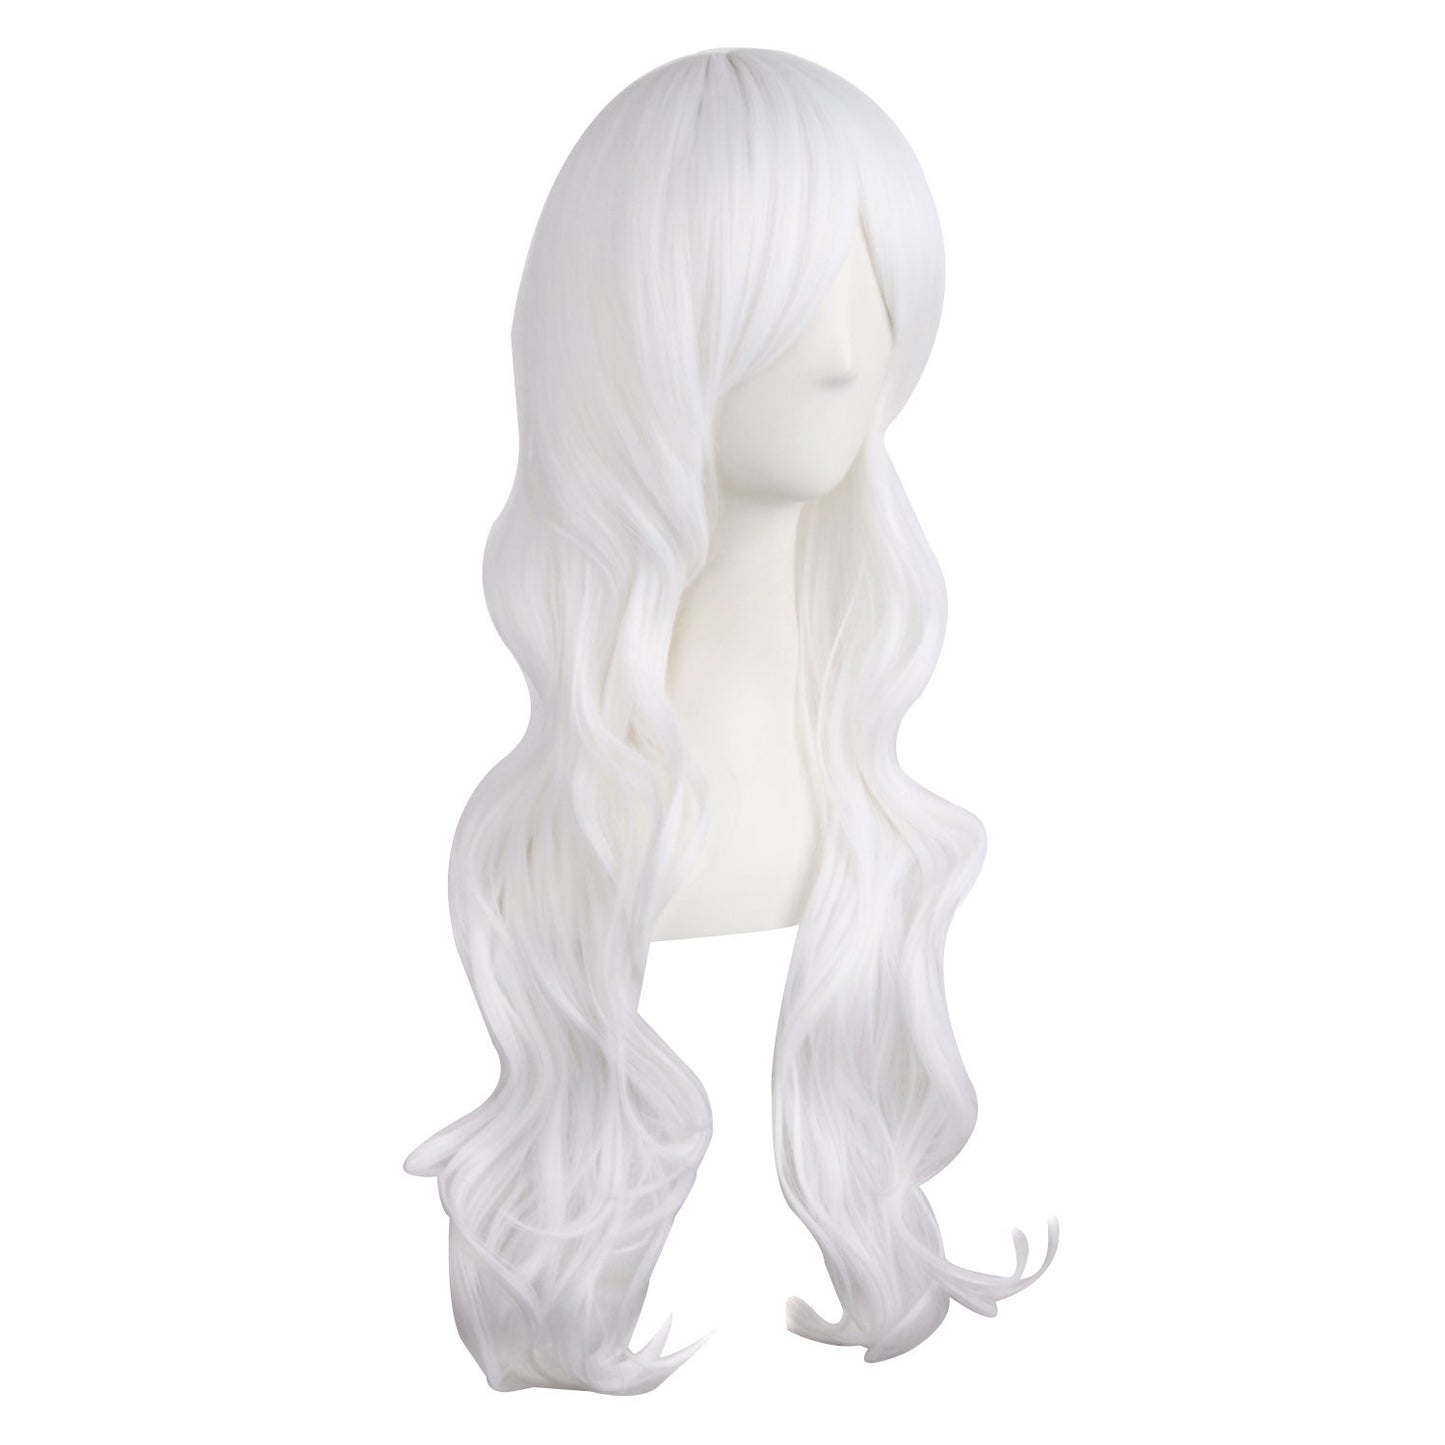 MapofBeauty 28"/70cm Charming Women's Long Curly Full Hair Wig (White)